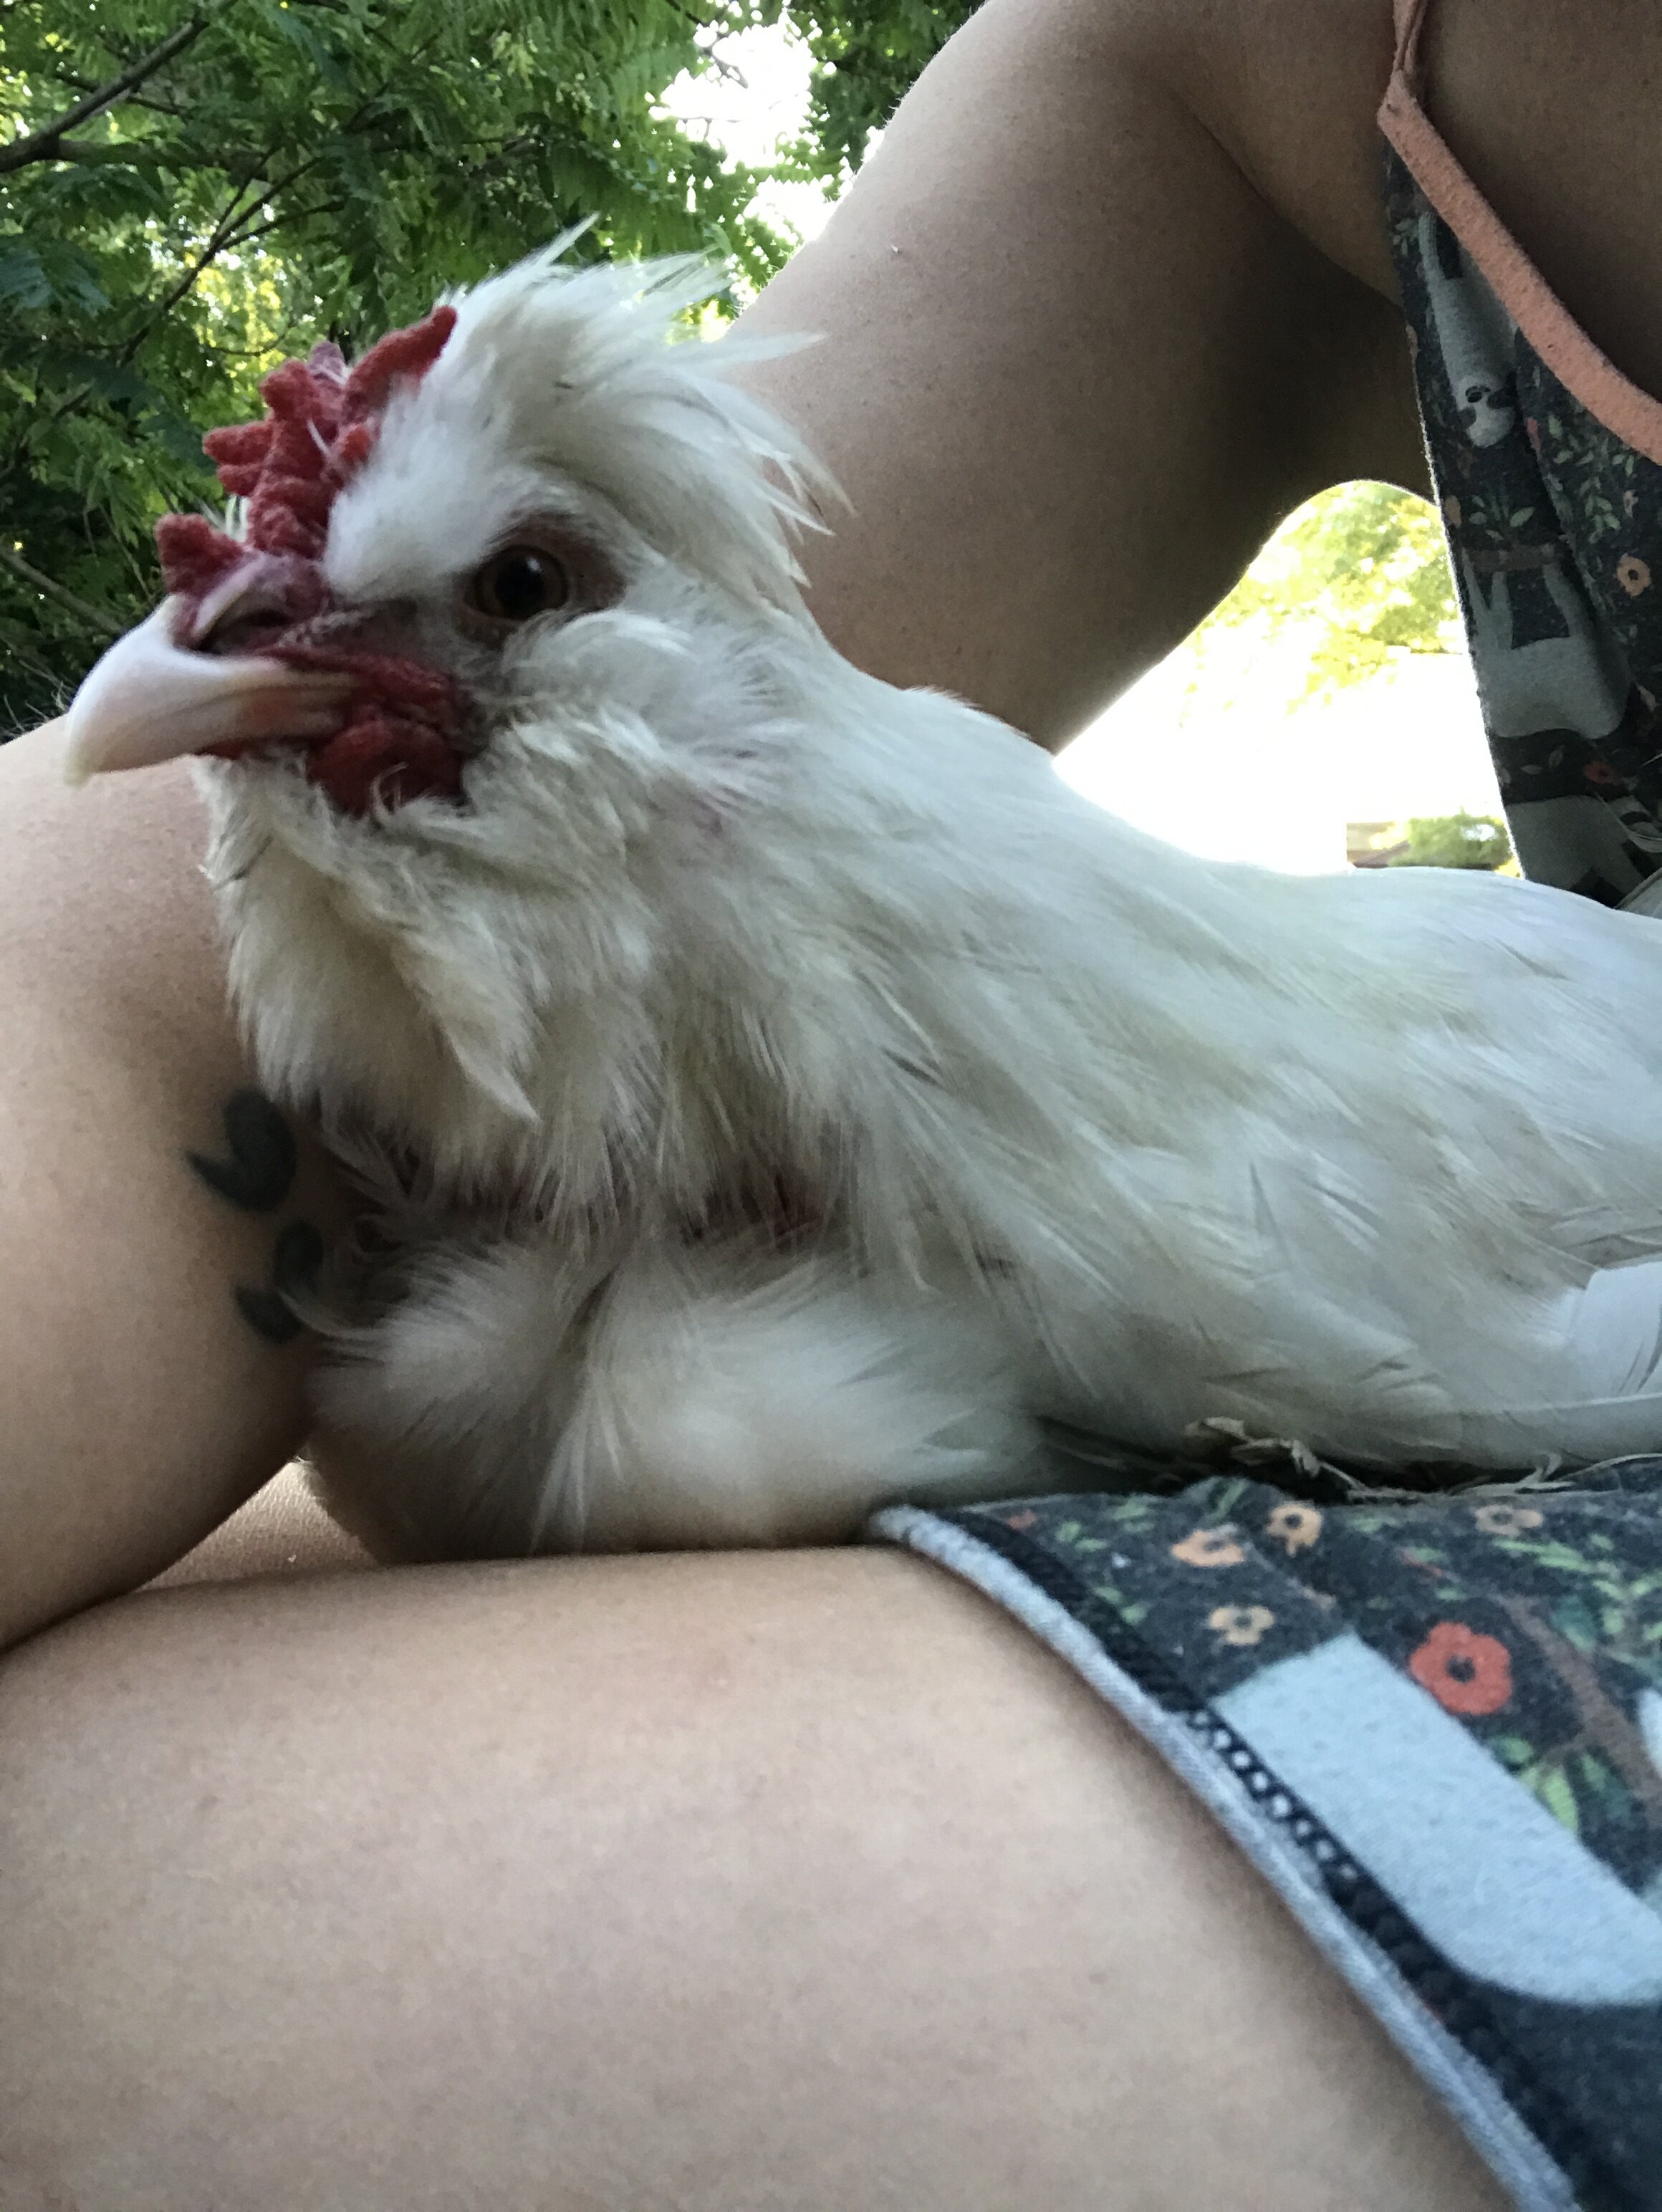  My rooster Foot, who is the bane of my existence and also my greatest love.  